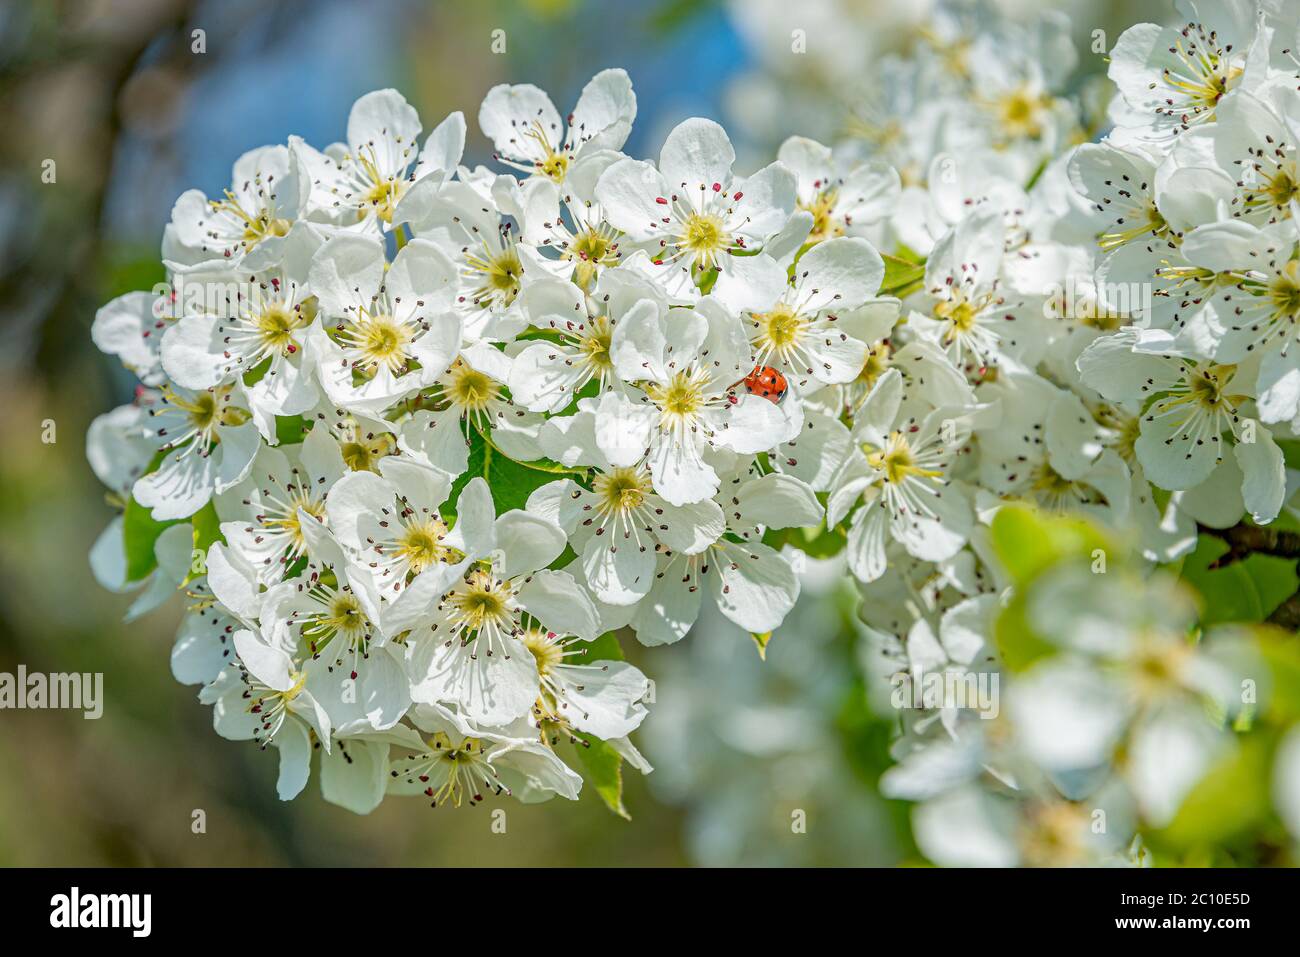 White flowers blossom of bearberry Cotoneaster (Cotoneaster dammeri) creeping shrub at early Spring, Germany Stock Photo